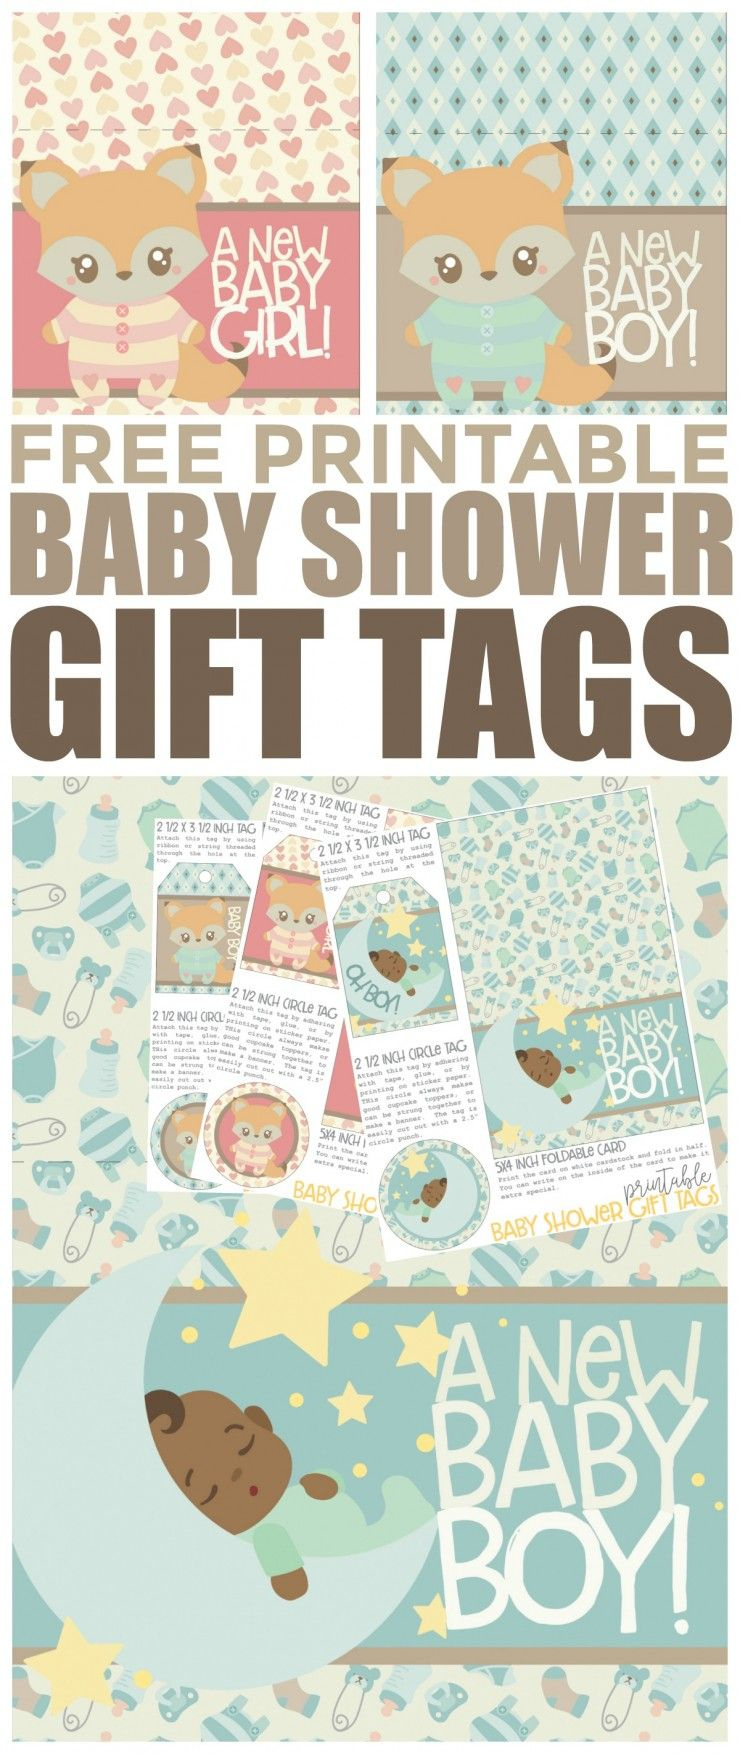 These Free Printable Baby Shower Gift Tags Are Super Fun And Cute inside Free Printable Baby Shower Gift Tags